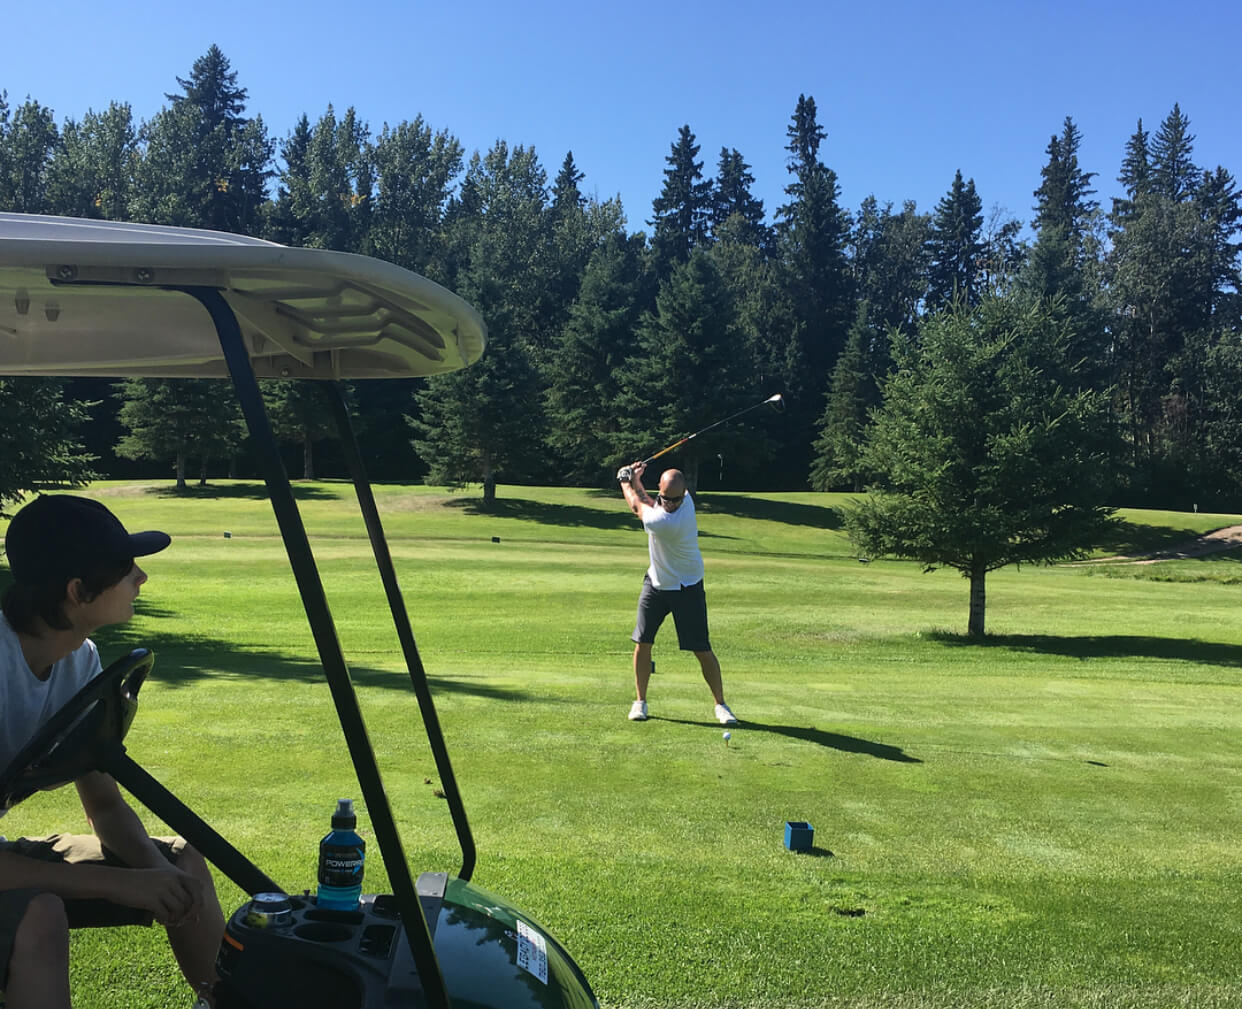 Man plays golf on green course in Alberta in summer months.